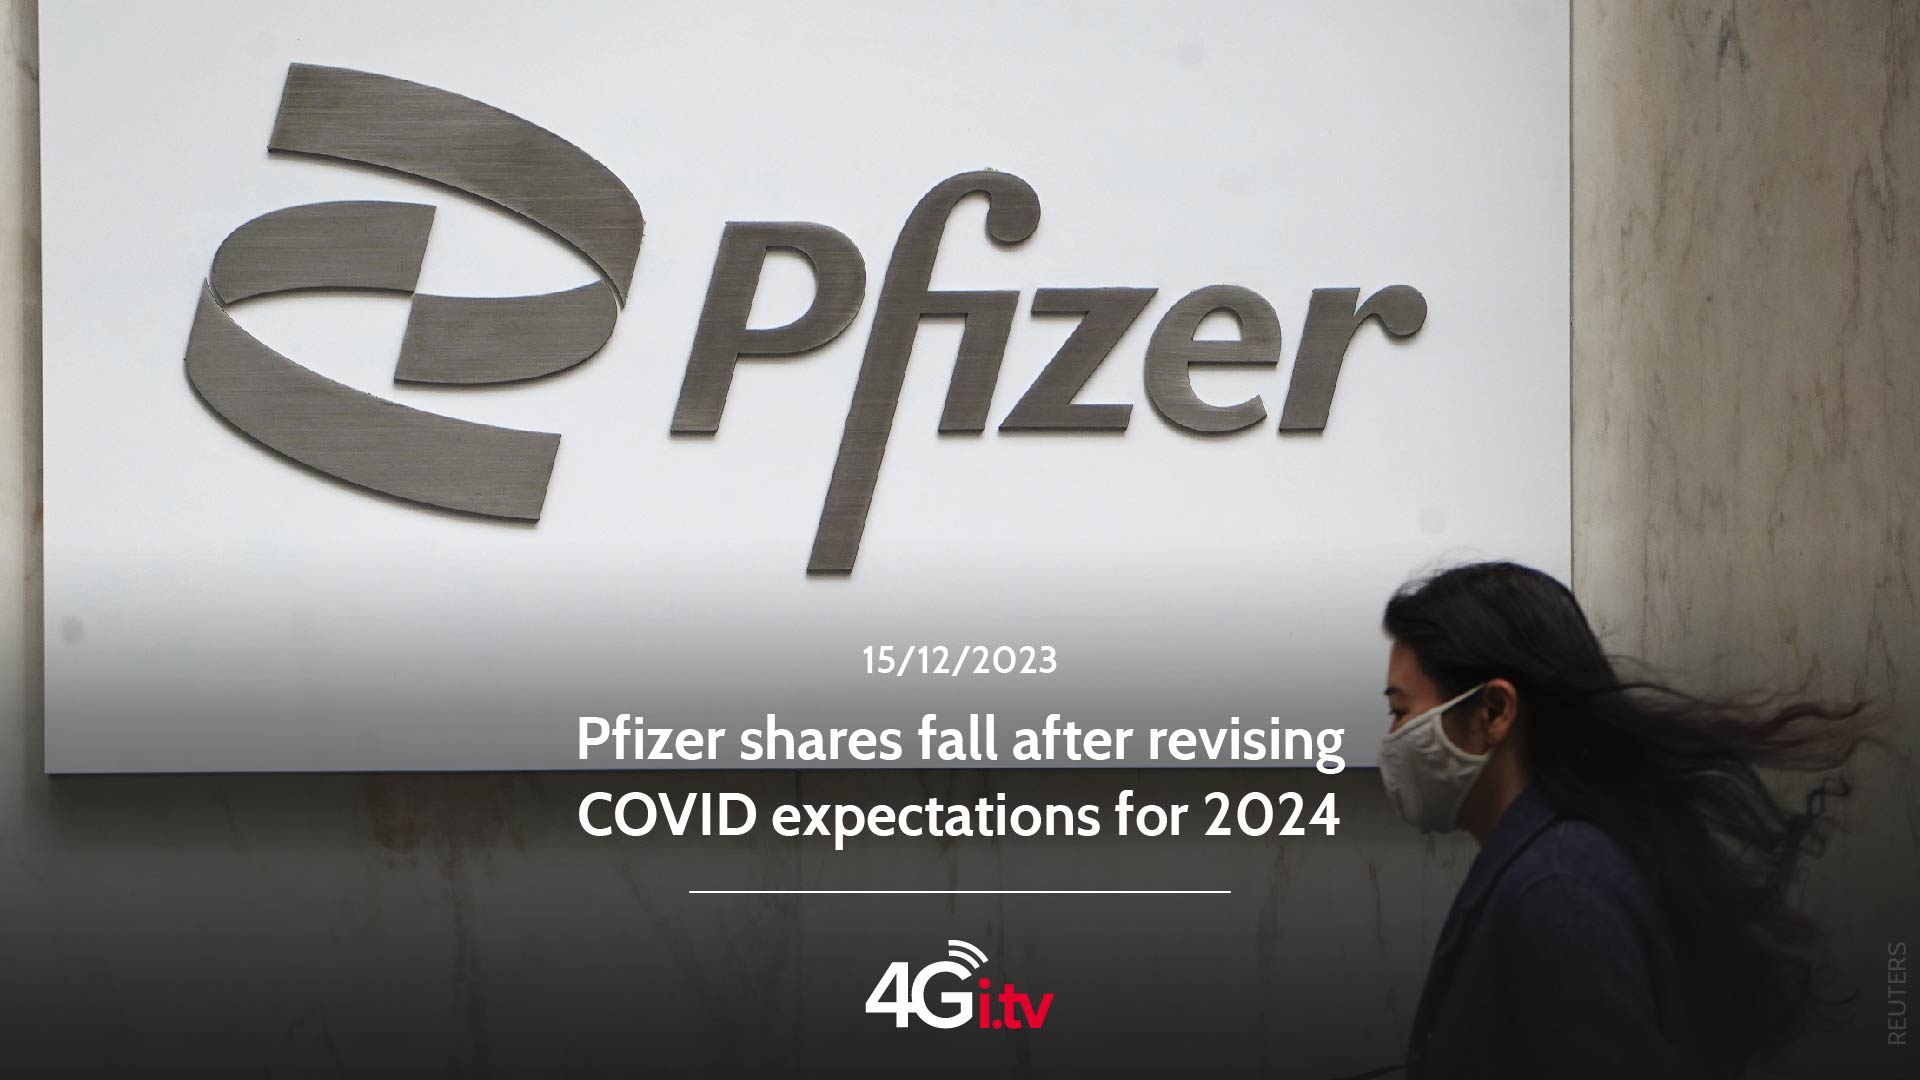 Подробнее о статье Pfizer shares fall after revising COVID expectations for 2024